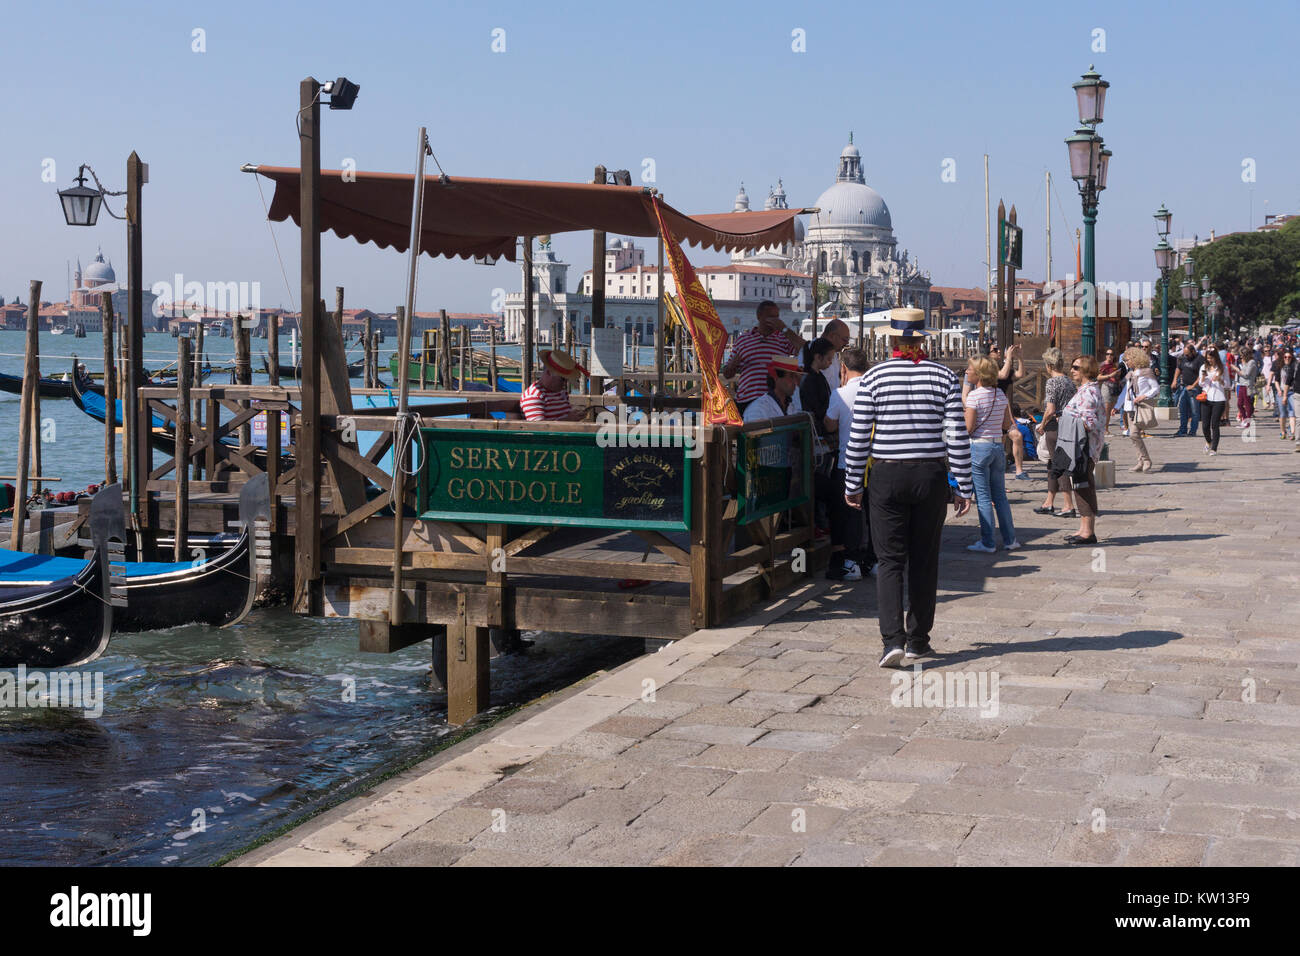 Gondoliers wearing traditional costumes at a Servizio Gondole with the Punta della Dogana in the background, Venice Stock Photo